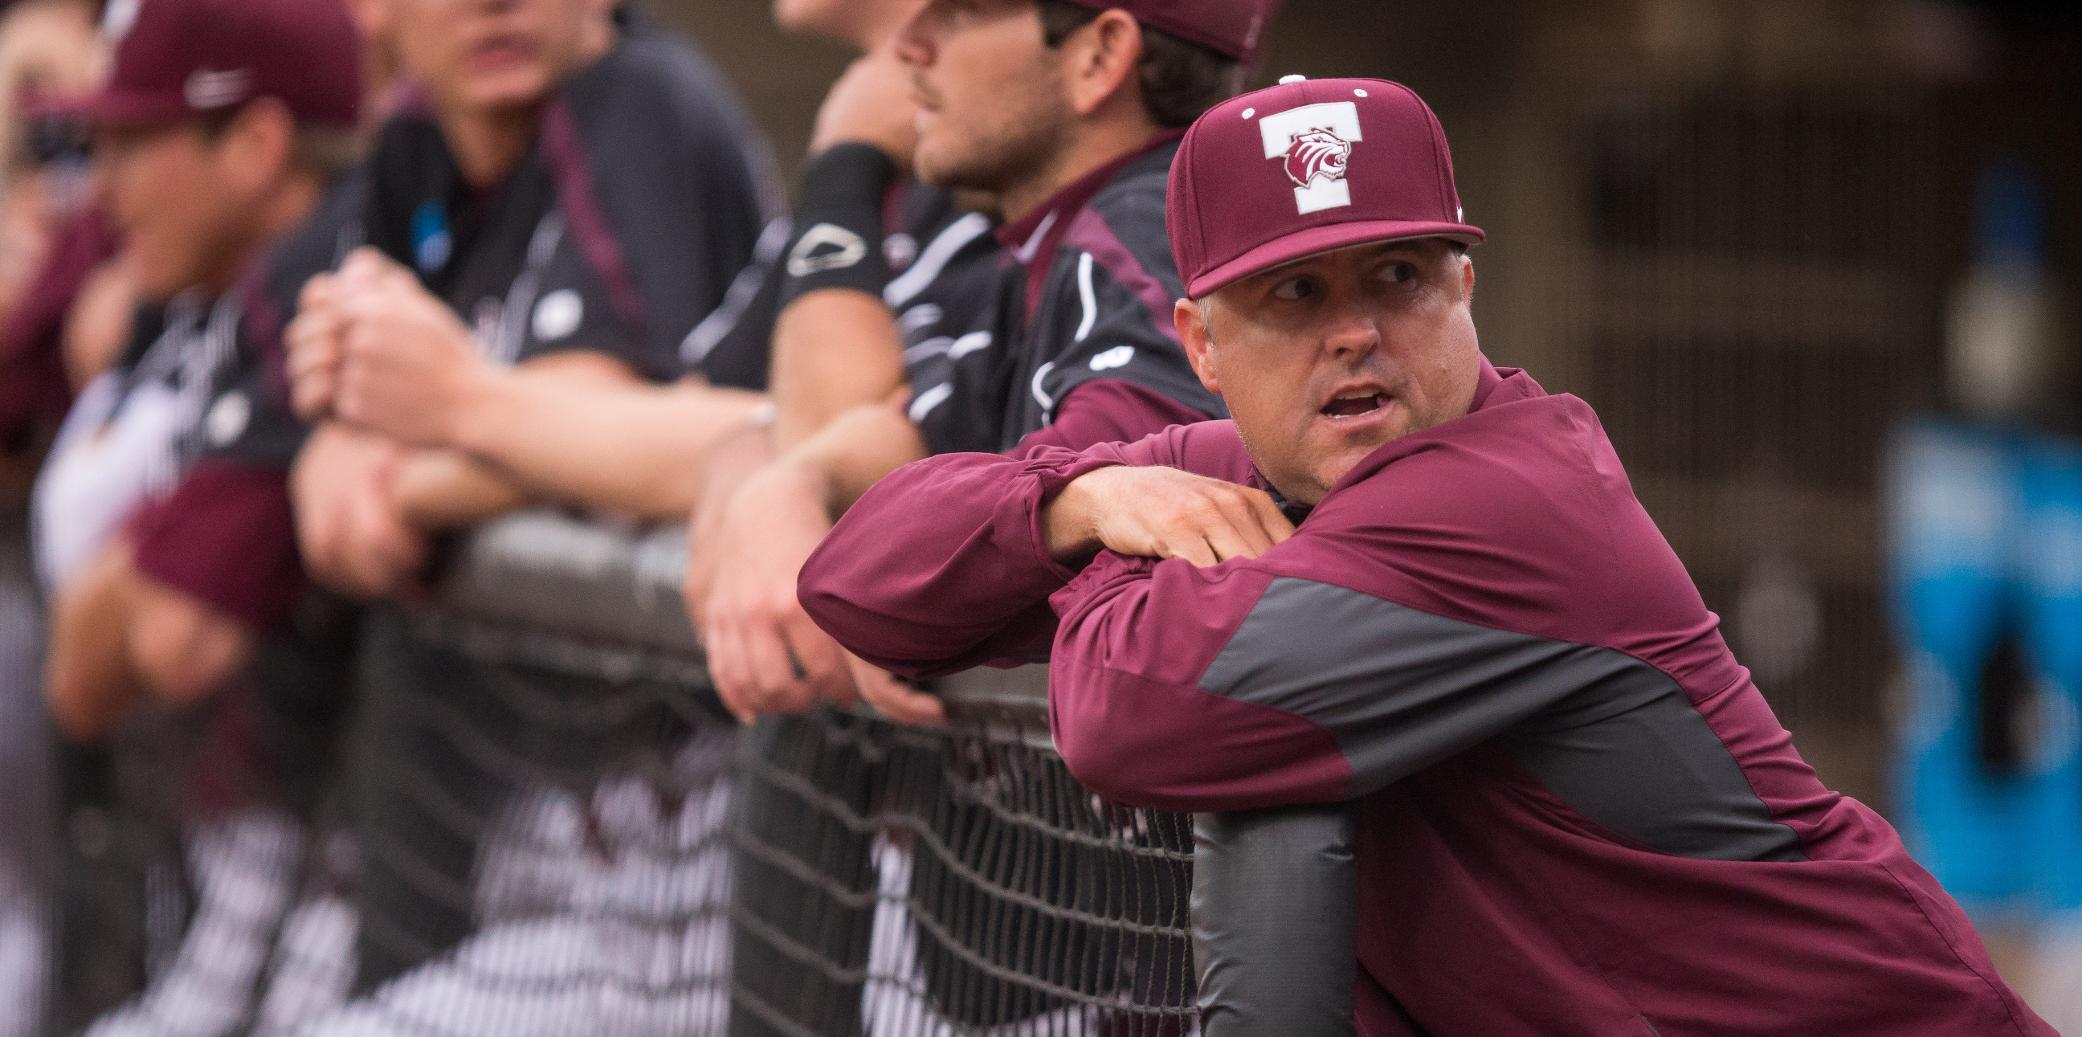 D3baseball.com Names Trinity's Tim Scannell Coach of the Year